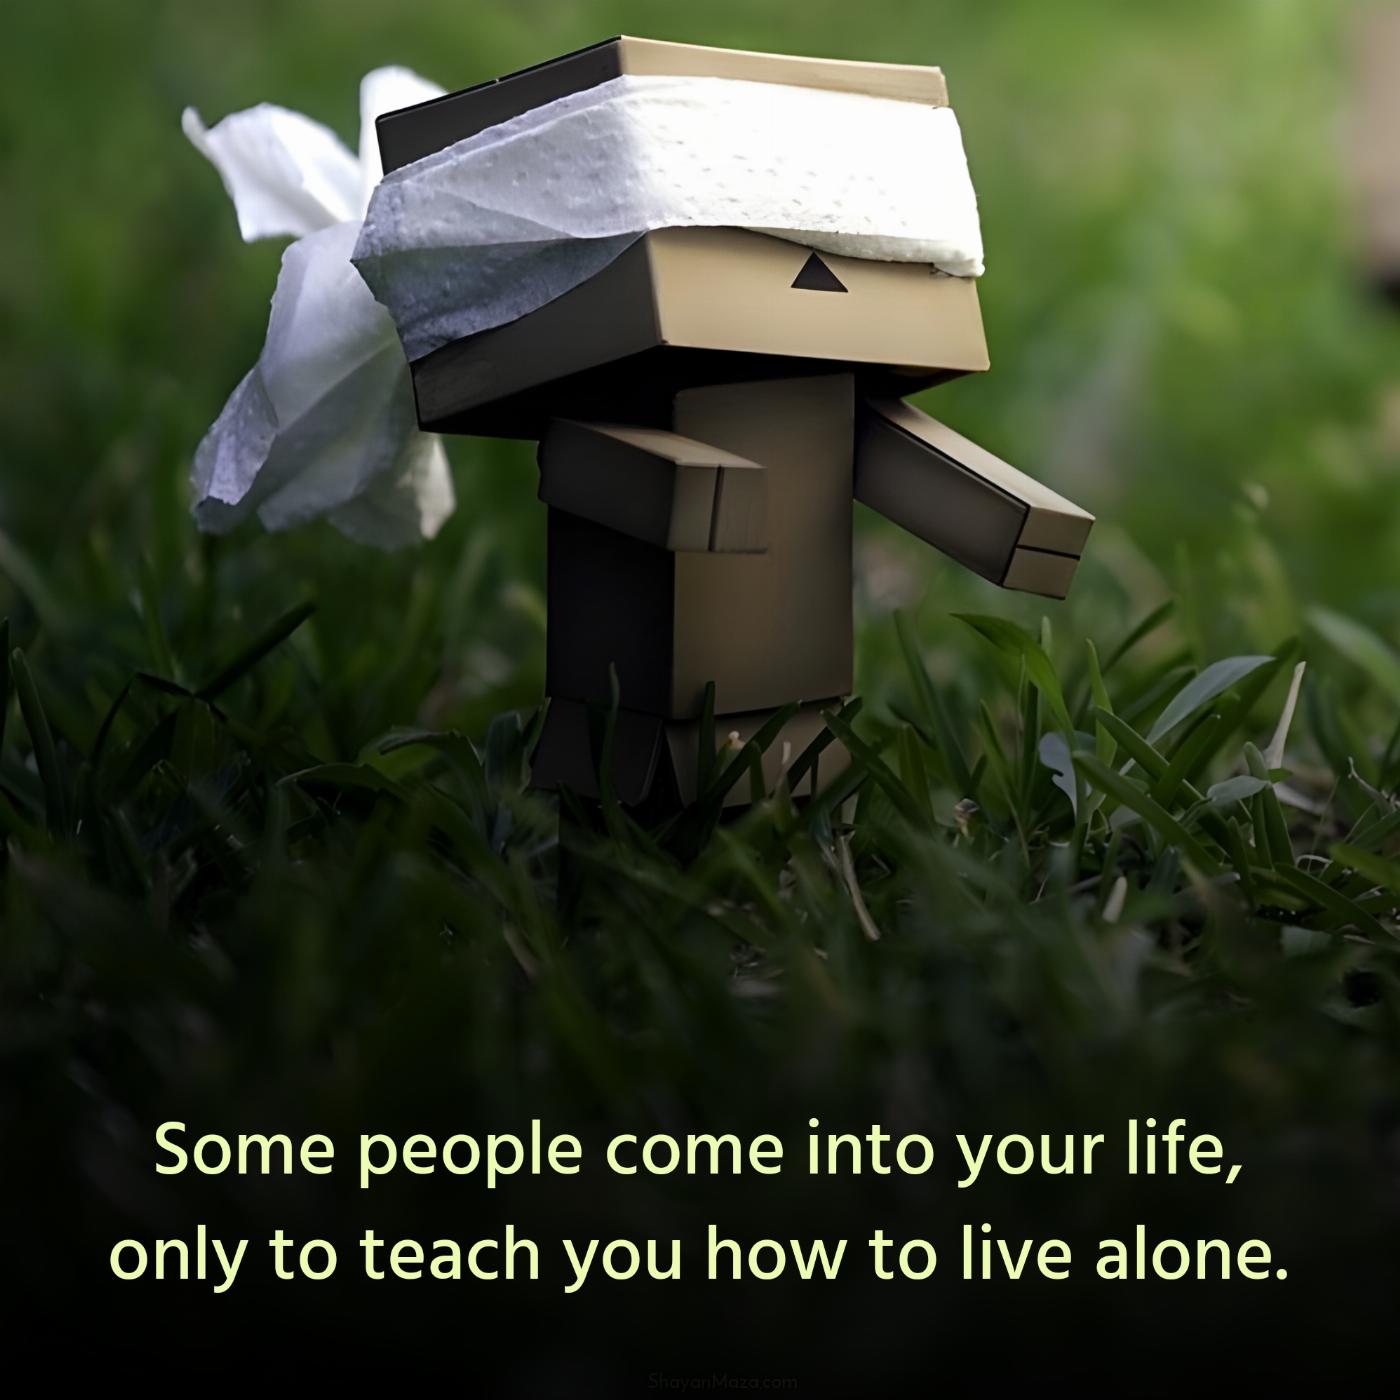 Some people come into your life only to teach you how to live alone